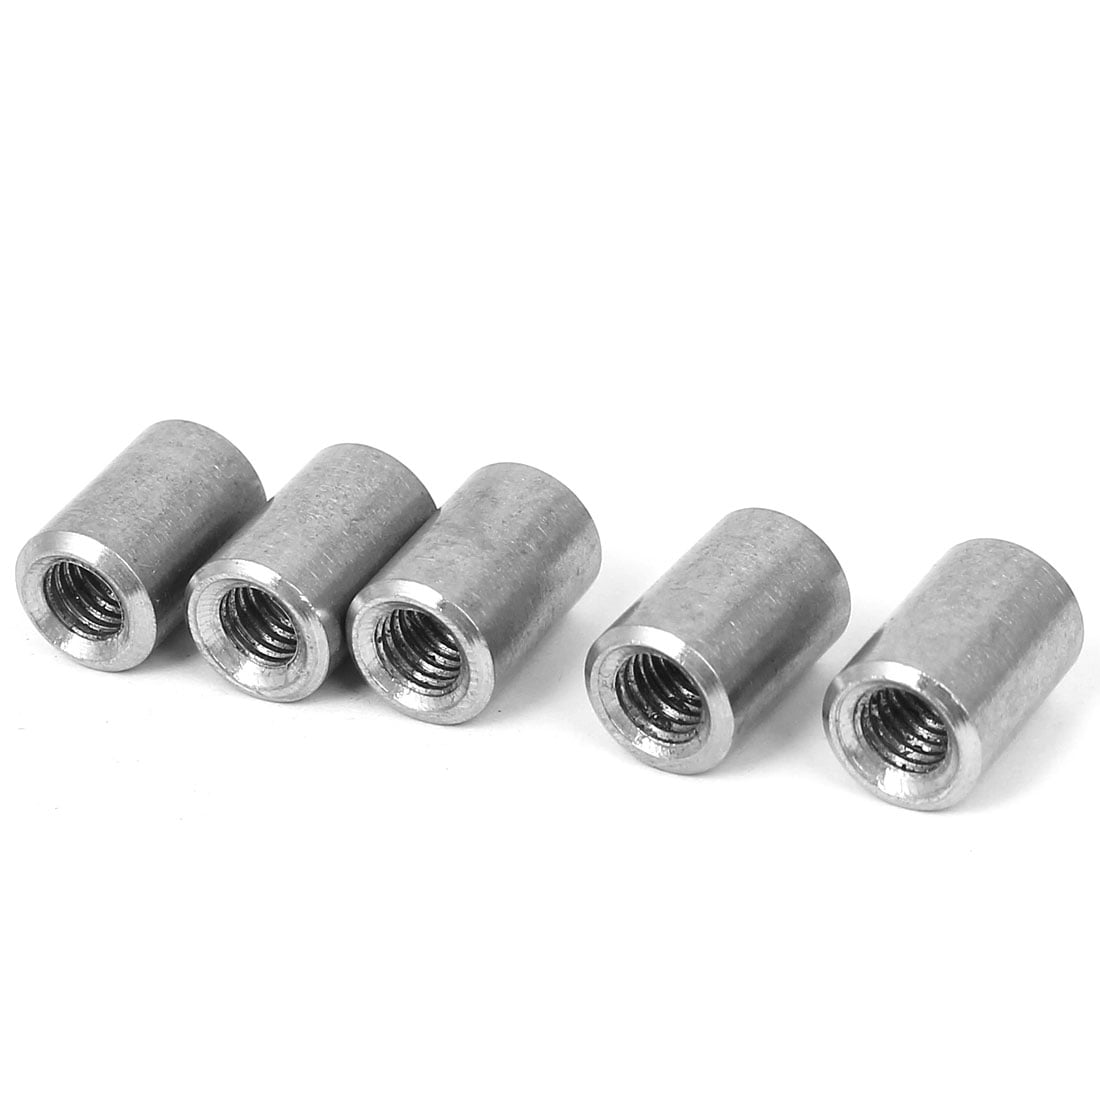 10Pcs M3-M16 304 Stainless Steel Round Coupling Connector Nuts Threaded Insert 